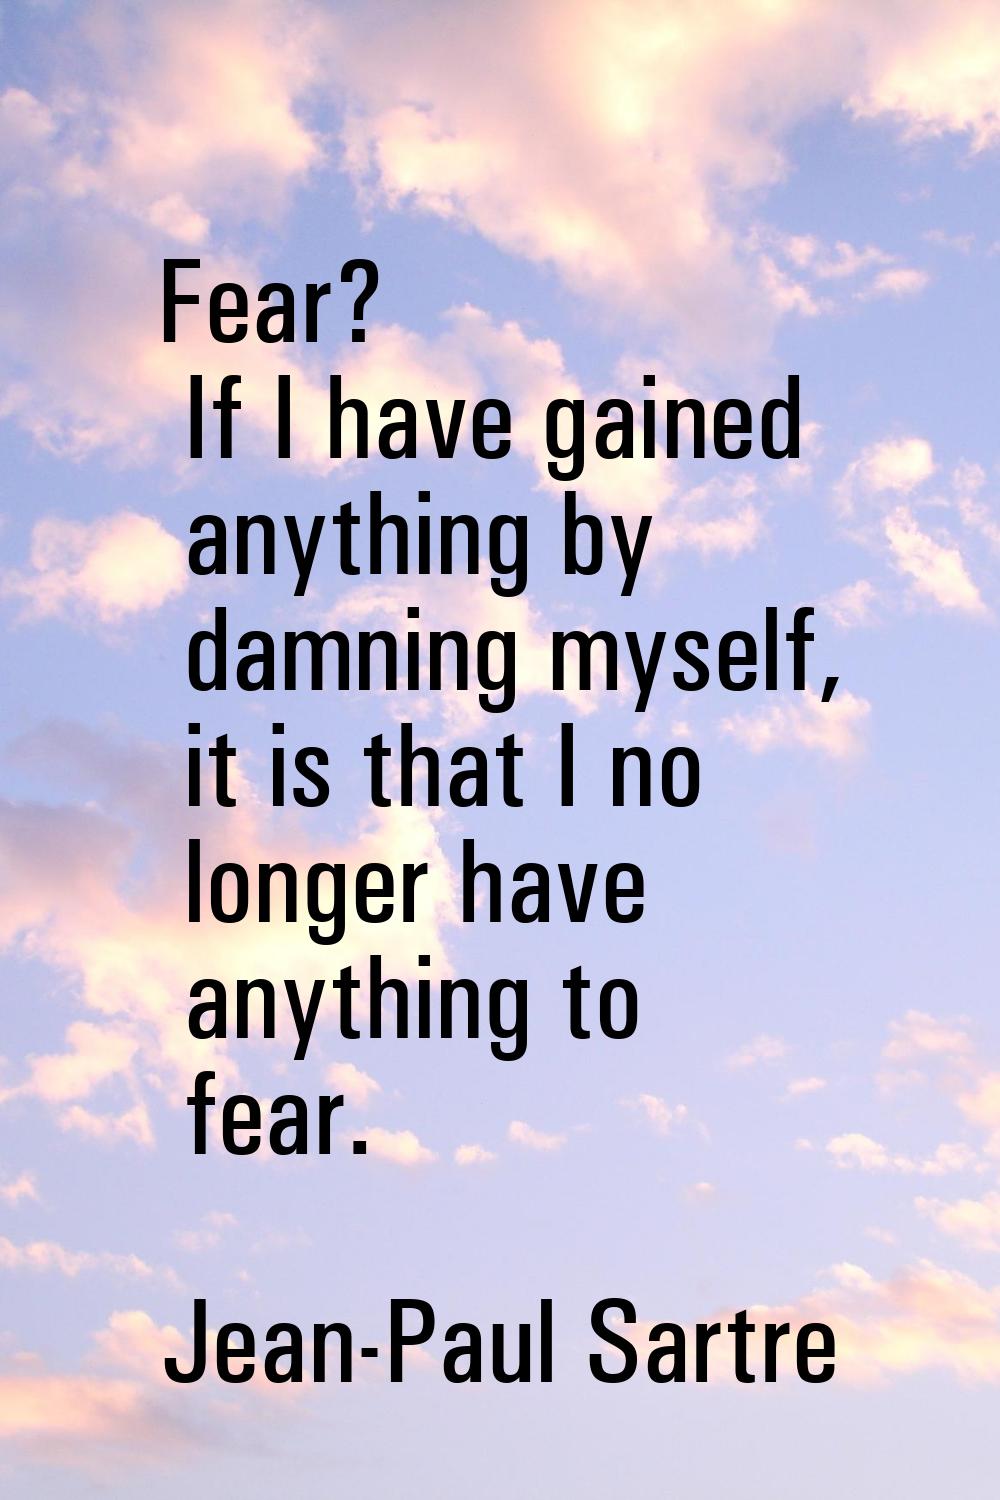 Fear? If I have gained anything by damning myself, it is that I no longer have anything to fear.